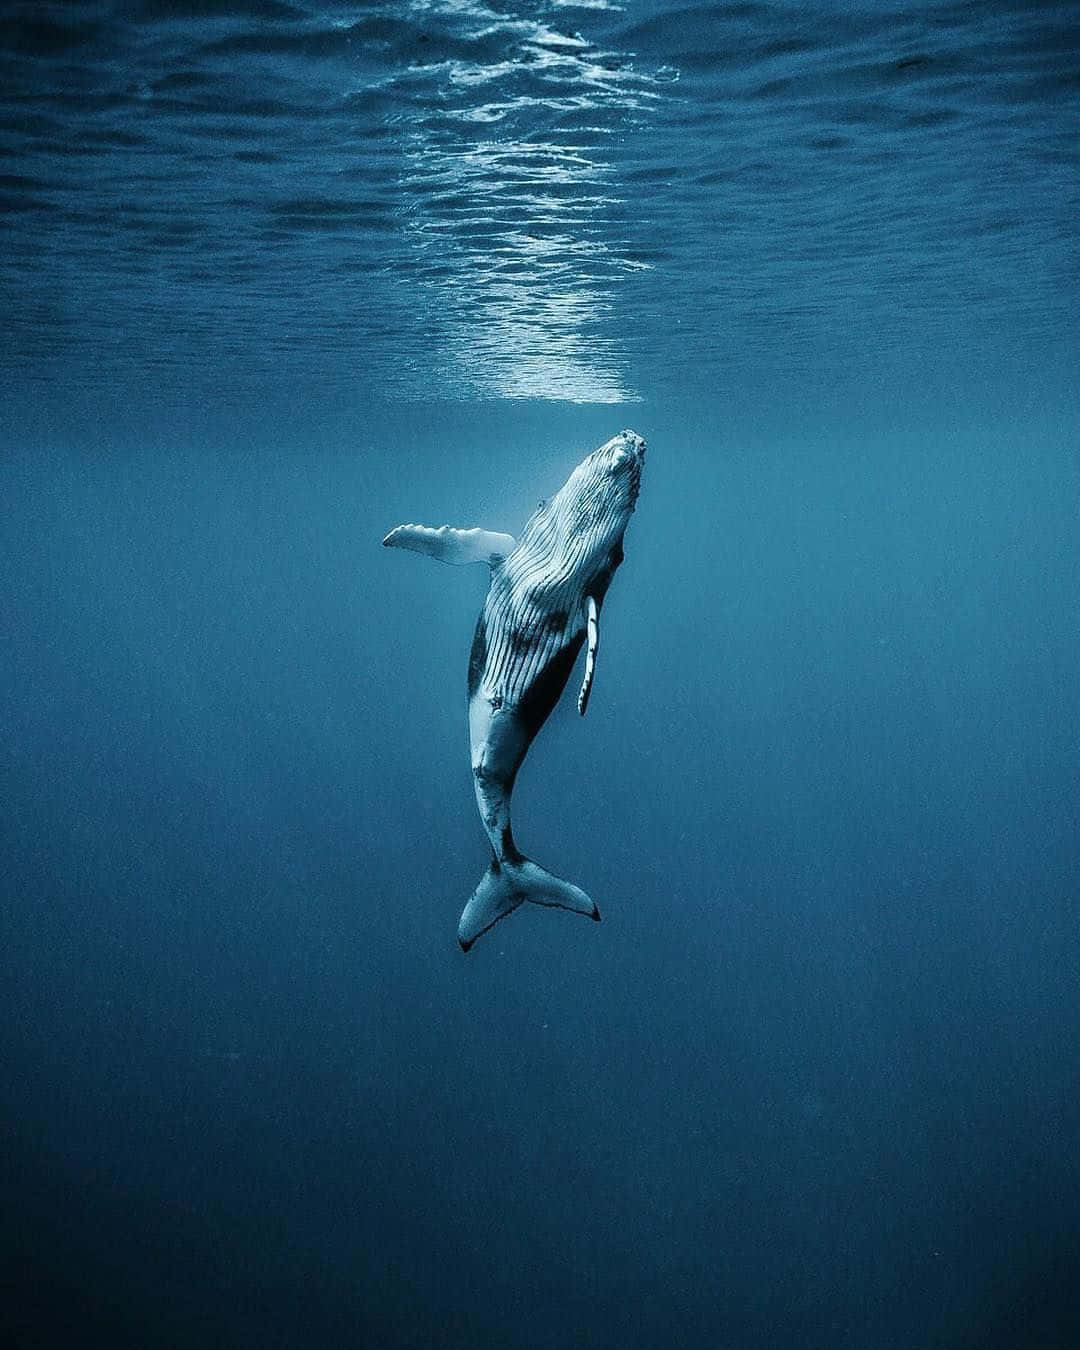 A majestic sperm whale swimming in the ocean